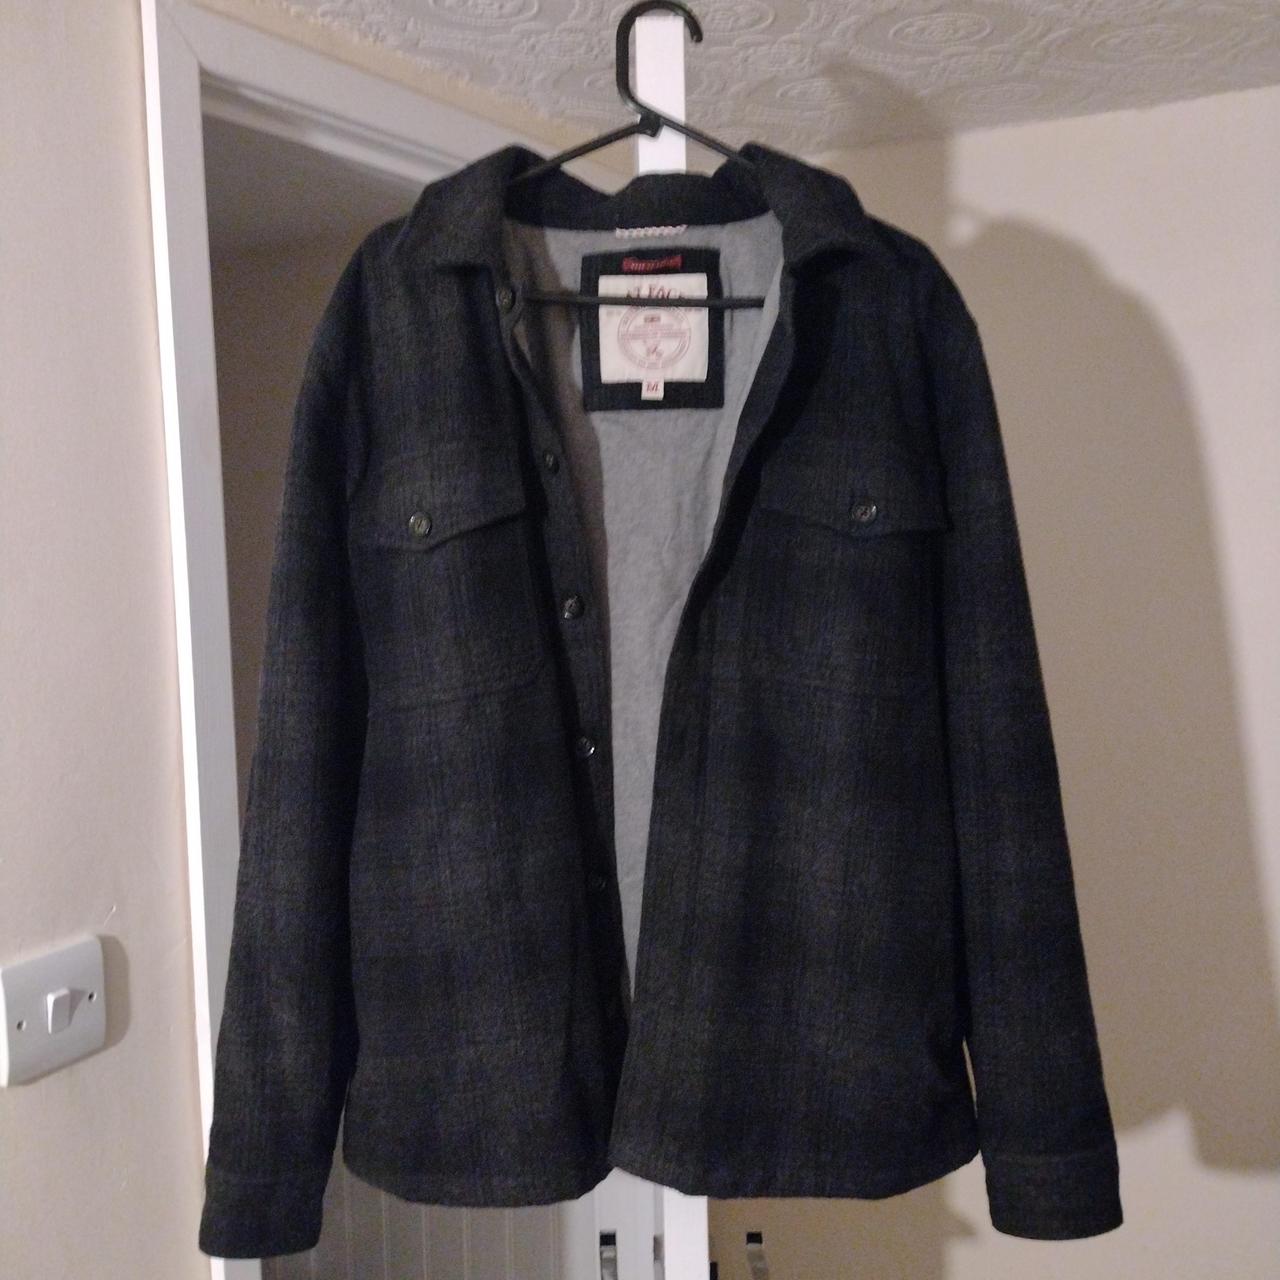 Men's fatface wool winter jacket, really nice and... - Depop